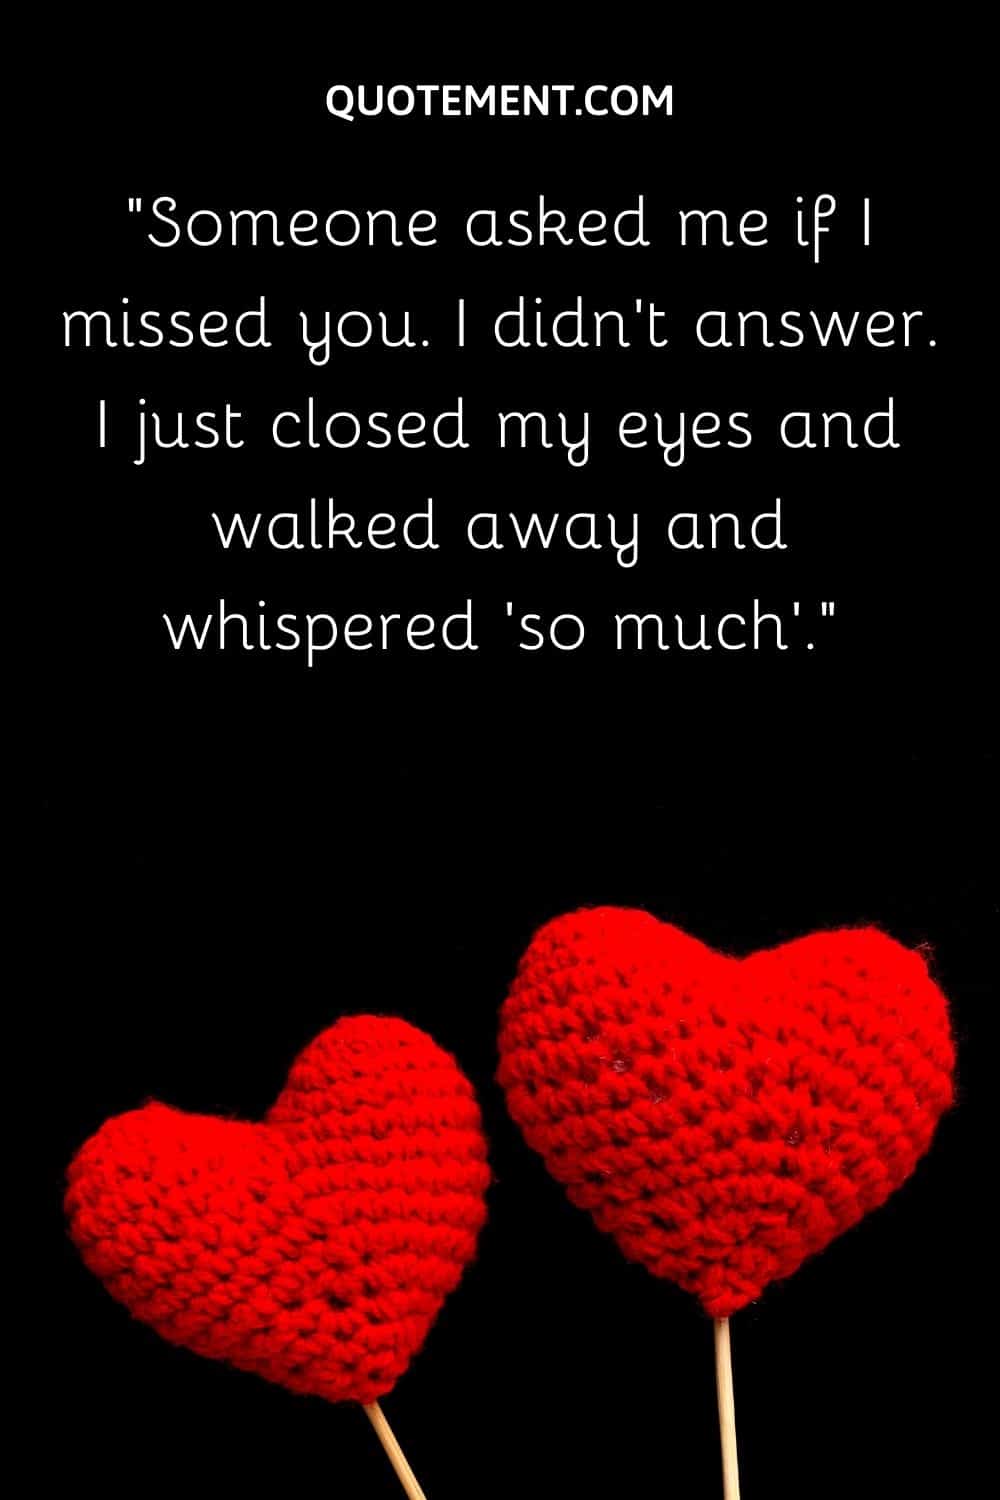 Someone asked me if I missed you. I didn't answer. I just closed my eyes and walked away and whispered 'so much'.